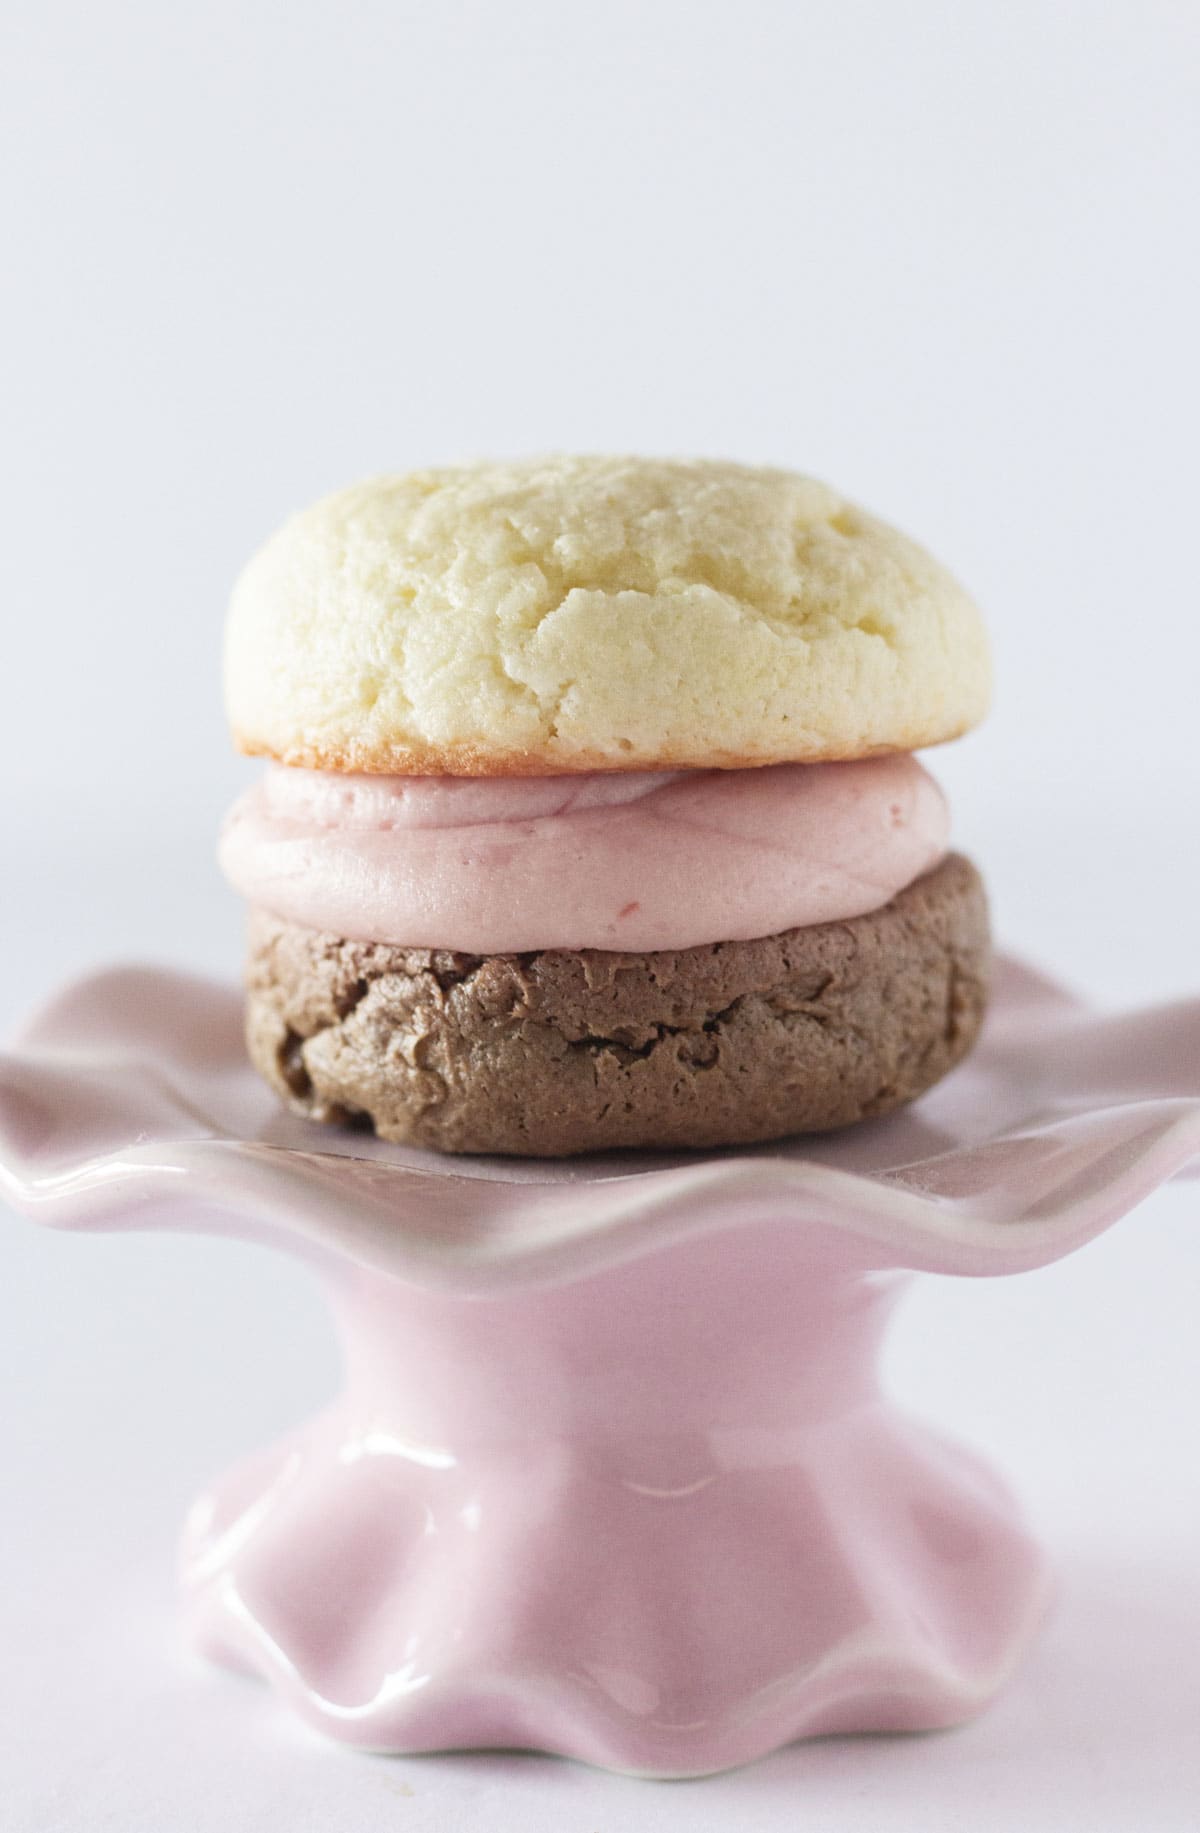 One Neapolitan sandwich cookie on a pink plate.